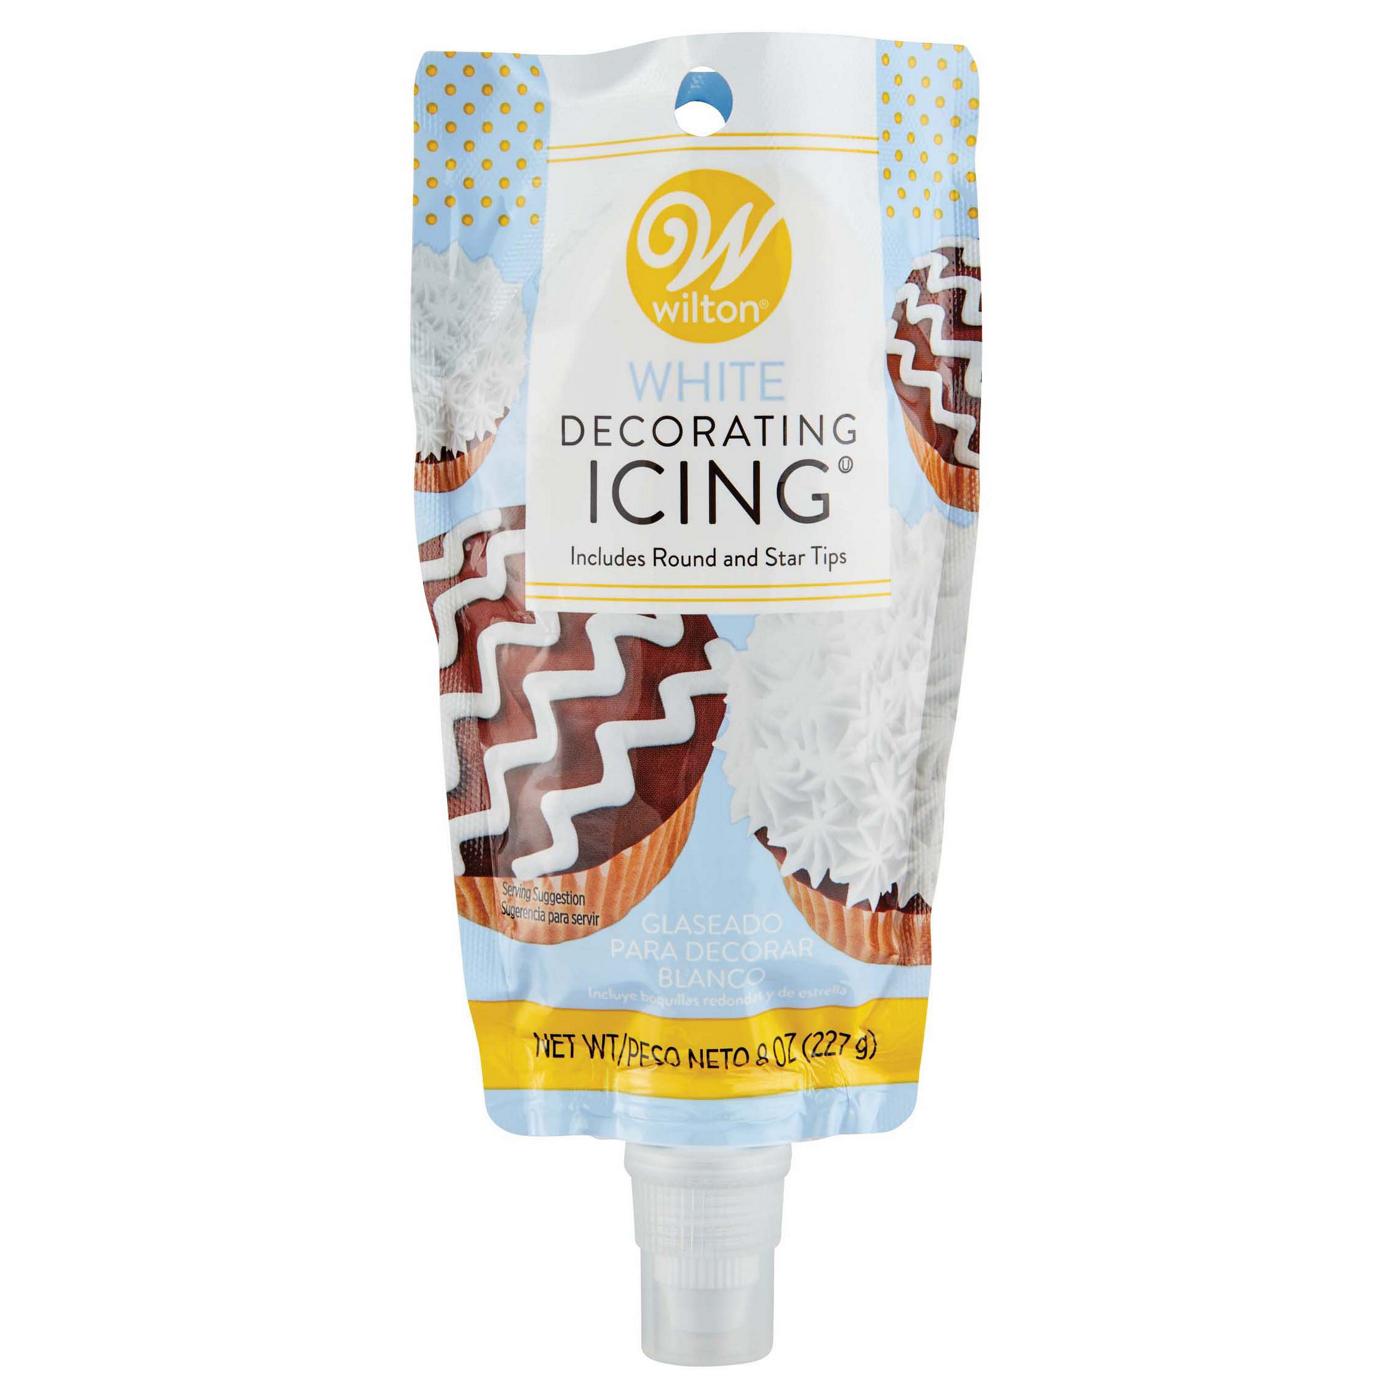 Wilton White Decorating Icing Pouch with Tips; image 1 of 2